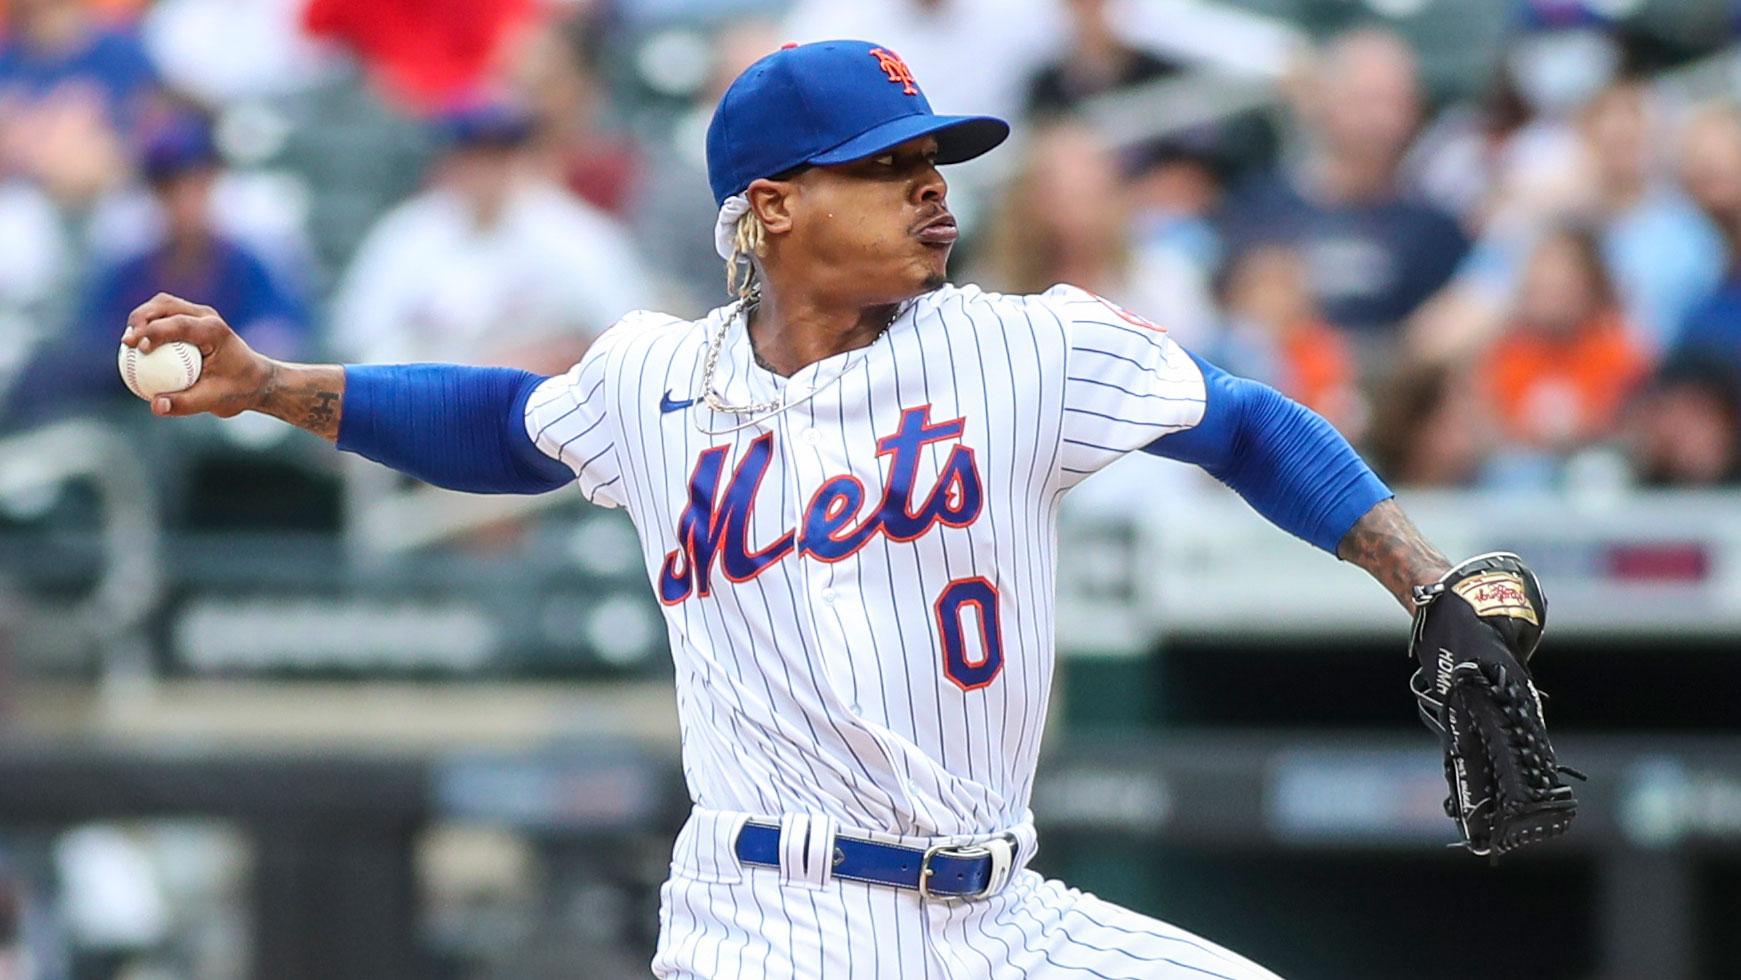 Jun 12, 2021; New York City, New York, USA; New York Mets pitcher Marcus Stroman (0) throws a pitch during the first inning against the San Diego Padres at Citi Field. / Wendell Cruz-USA TODAY Sports